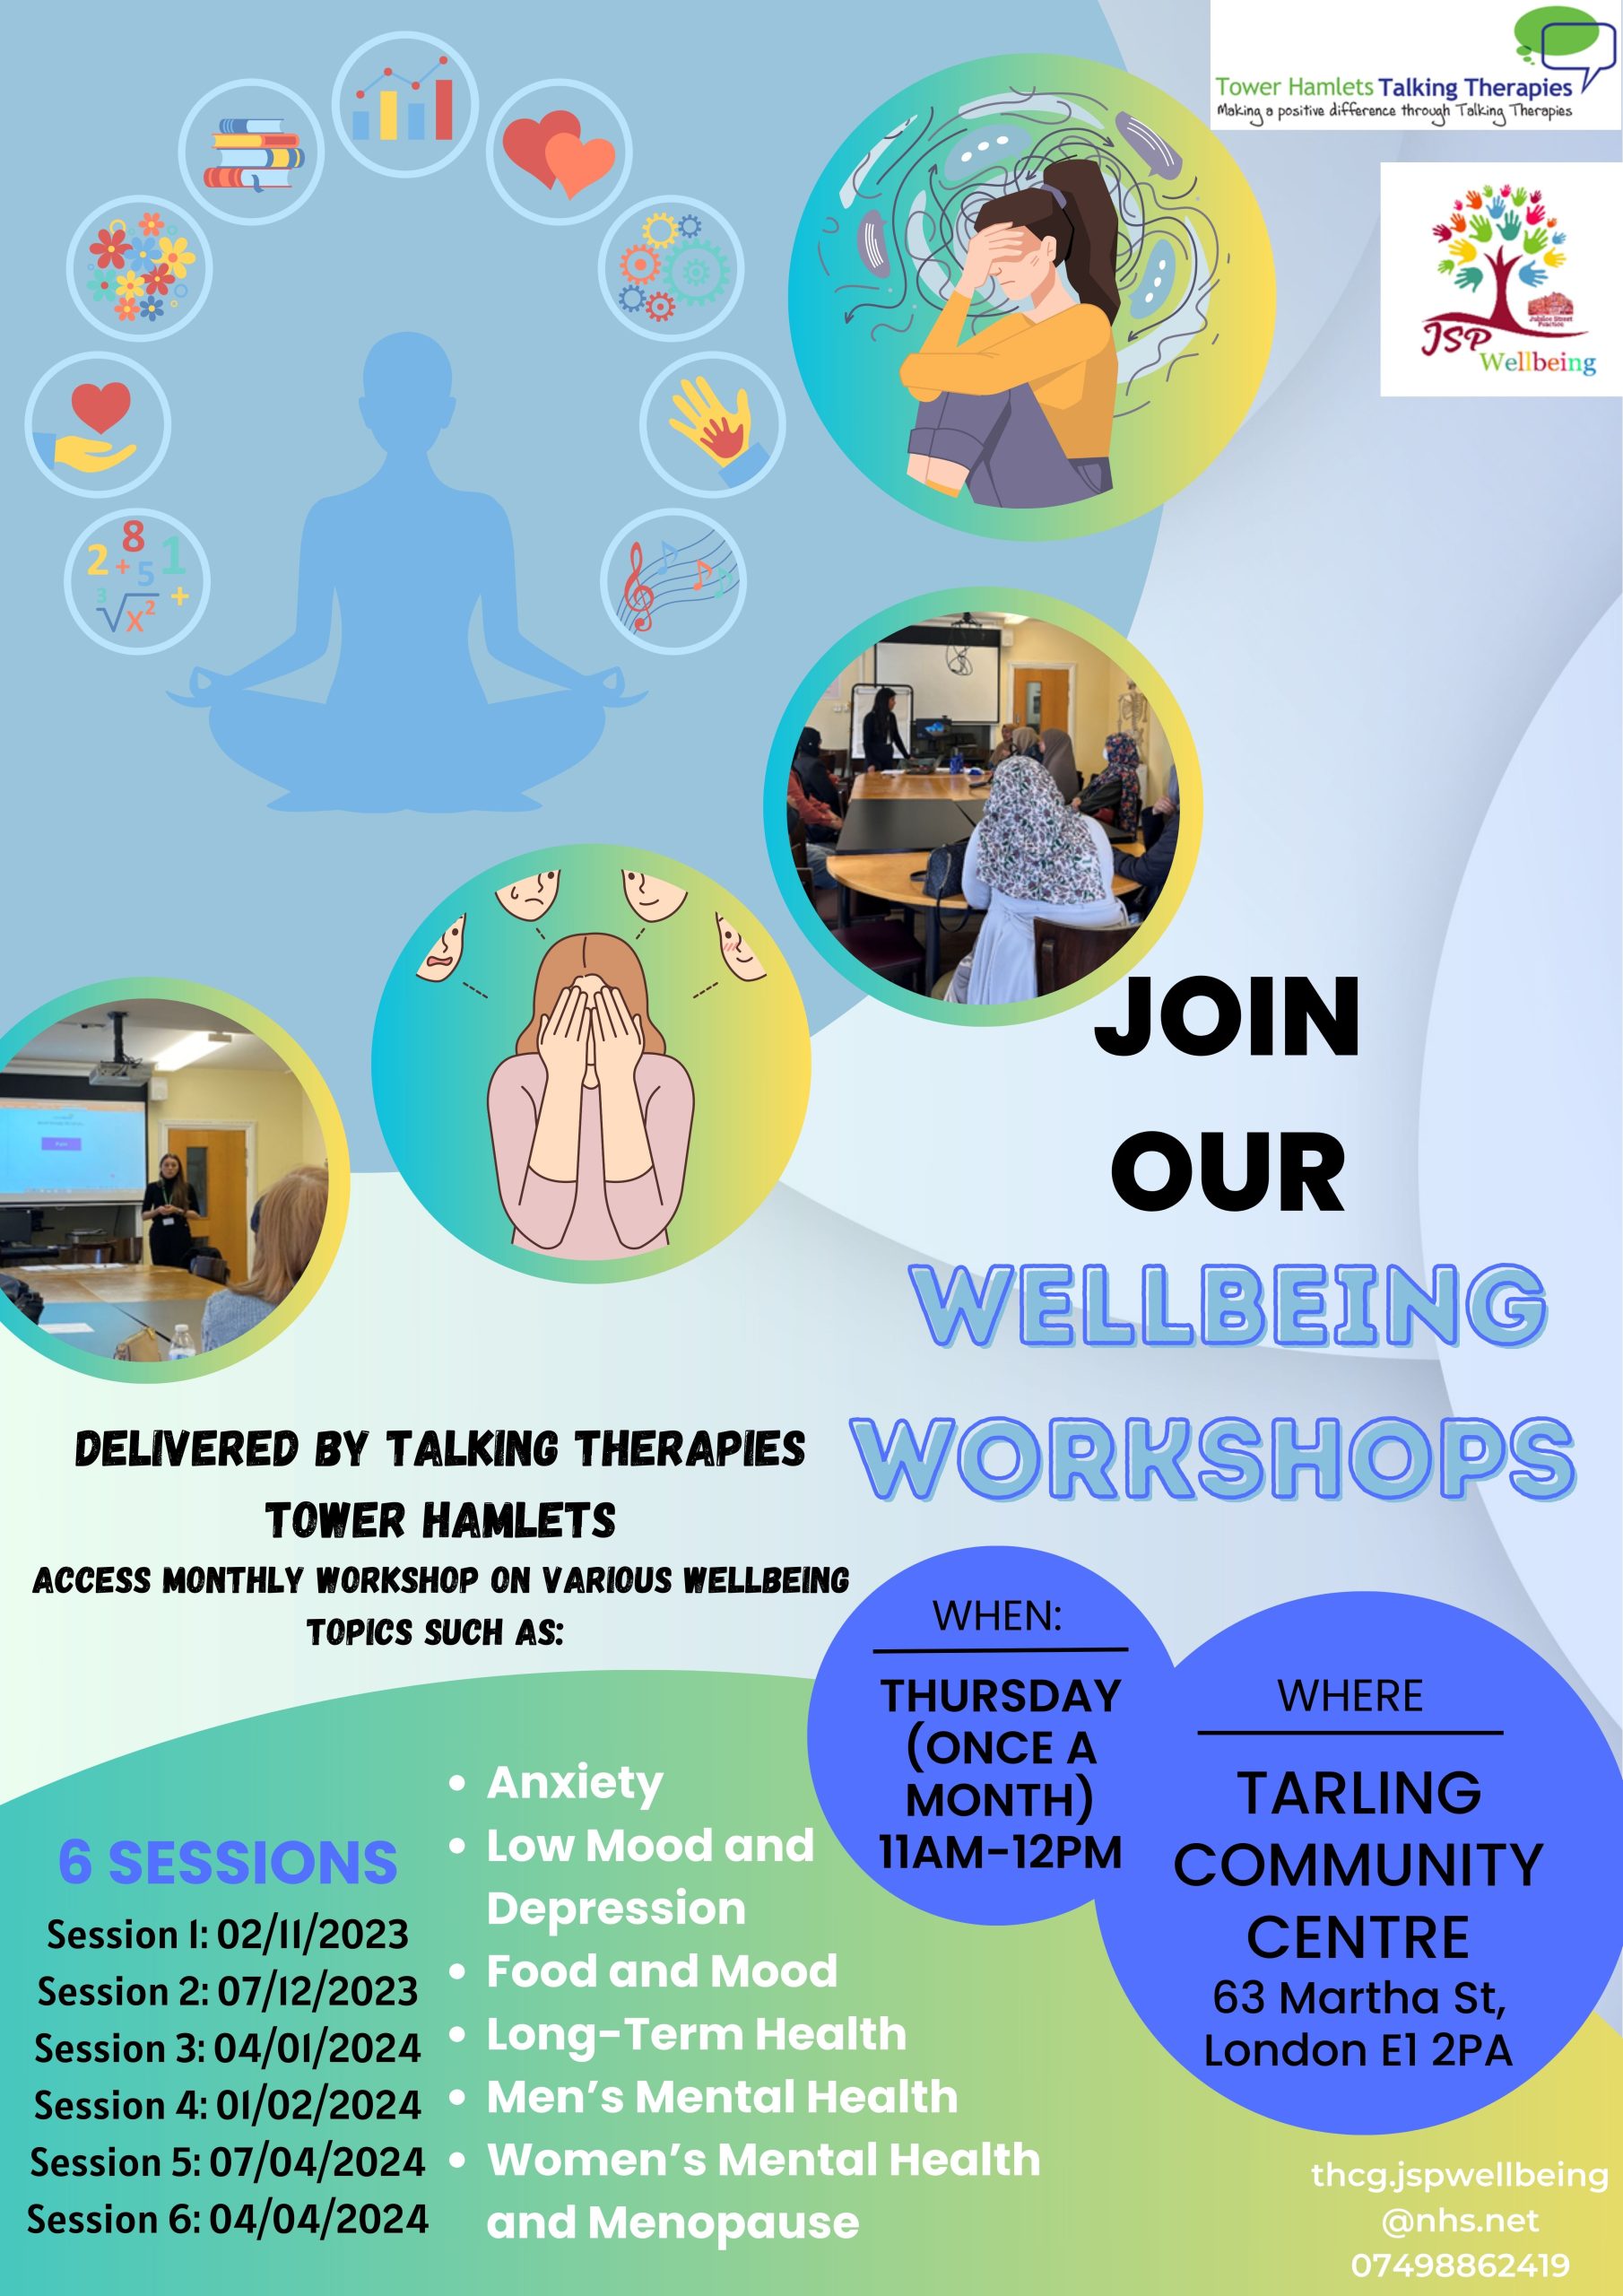 November Health & Wellbeing Activities | City Square Medical Group